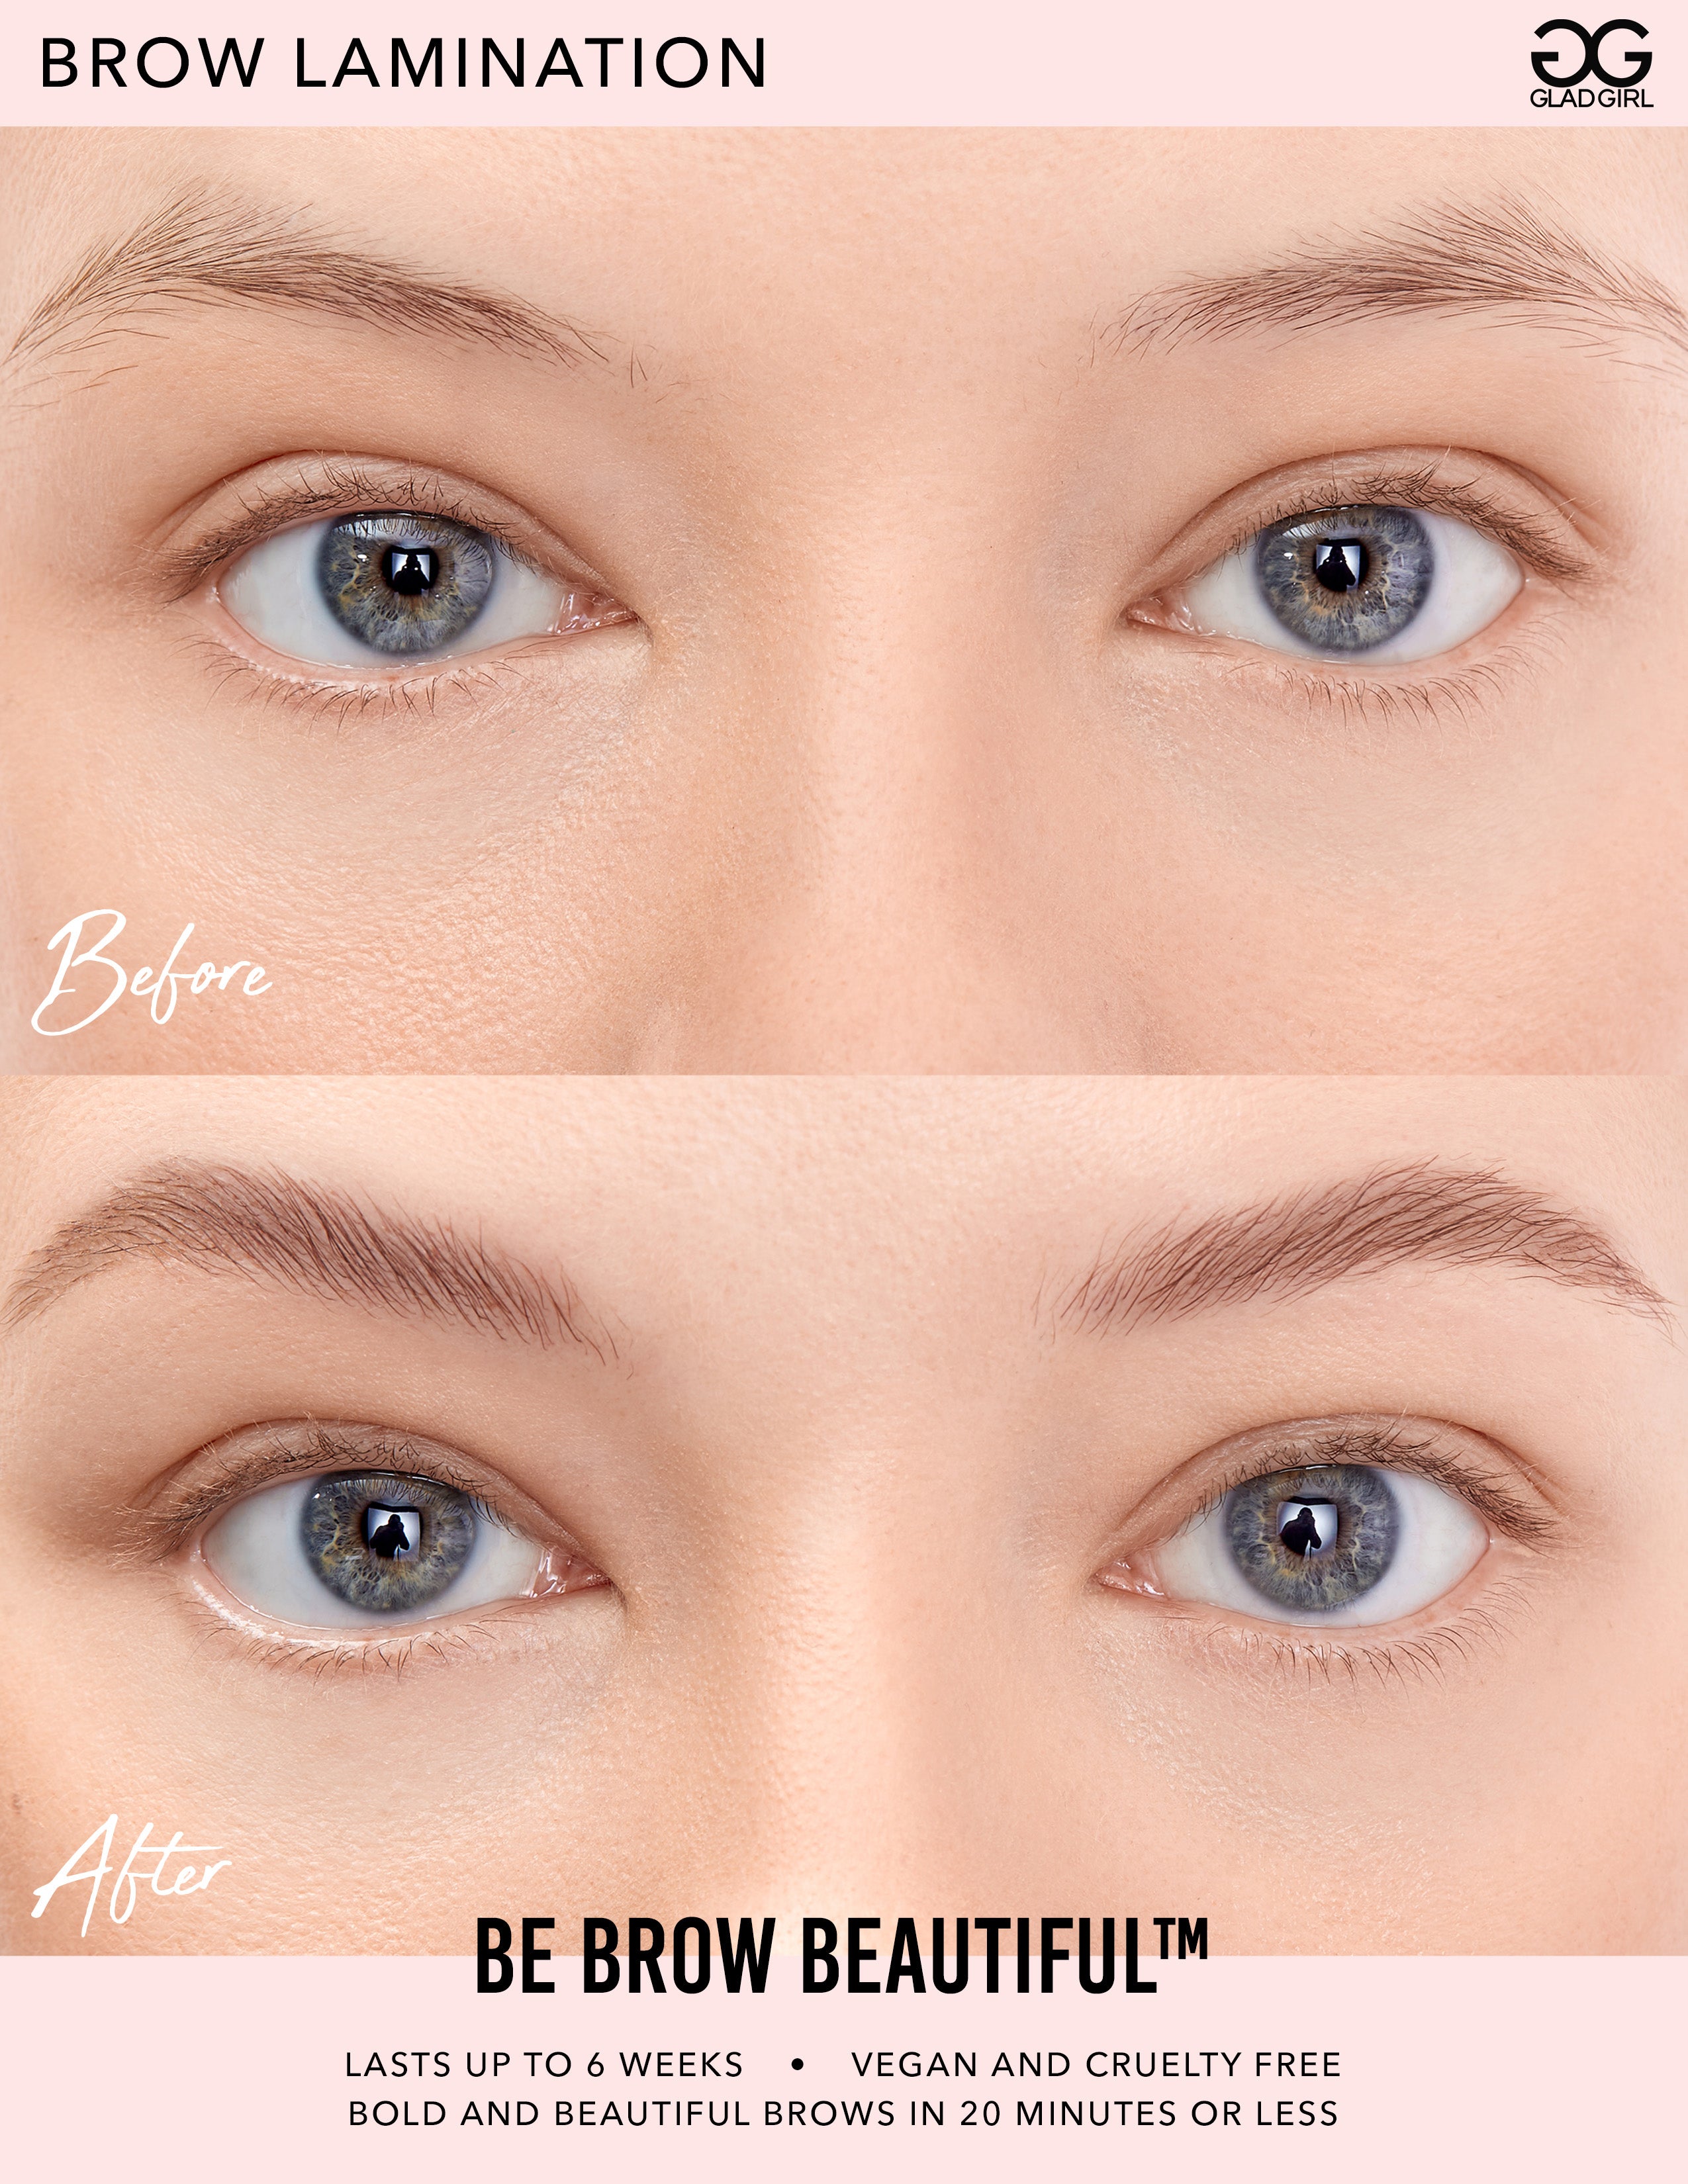 products/BrowLaminationBeforeandAfter8.5x11.jpg